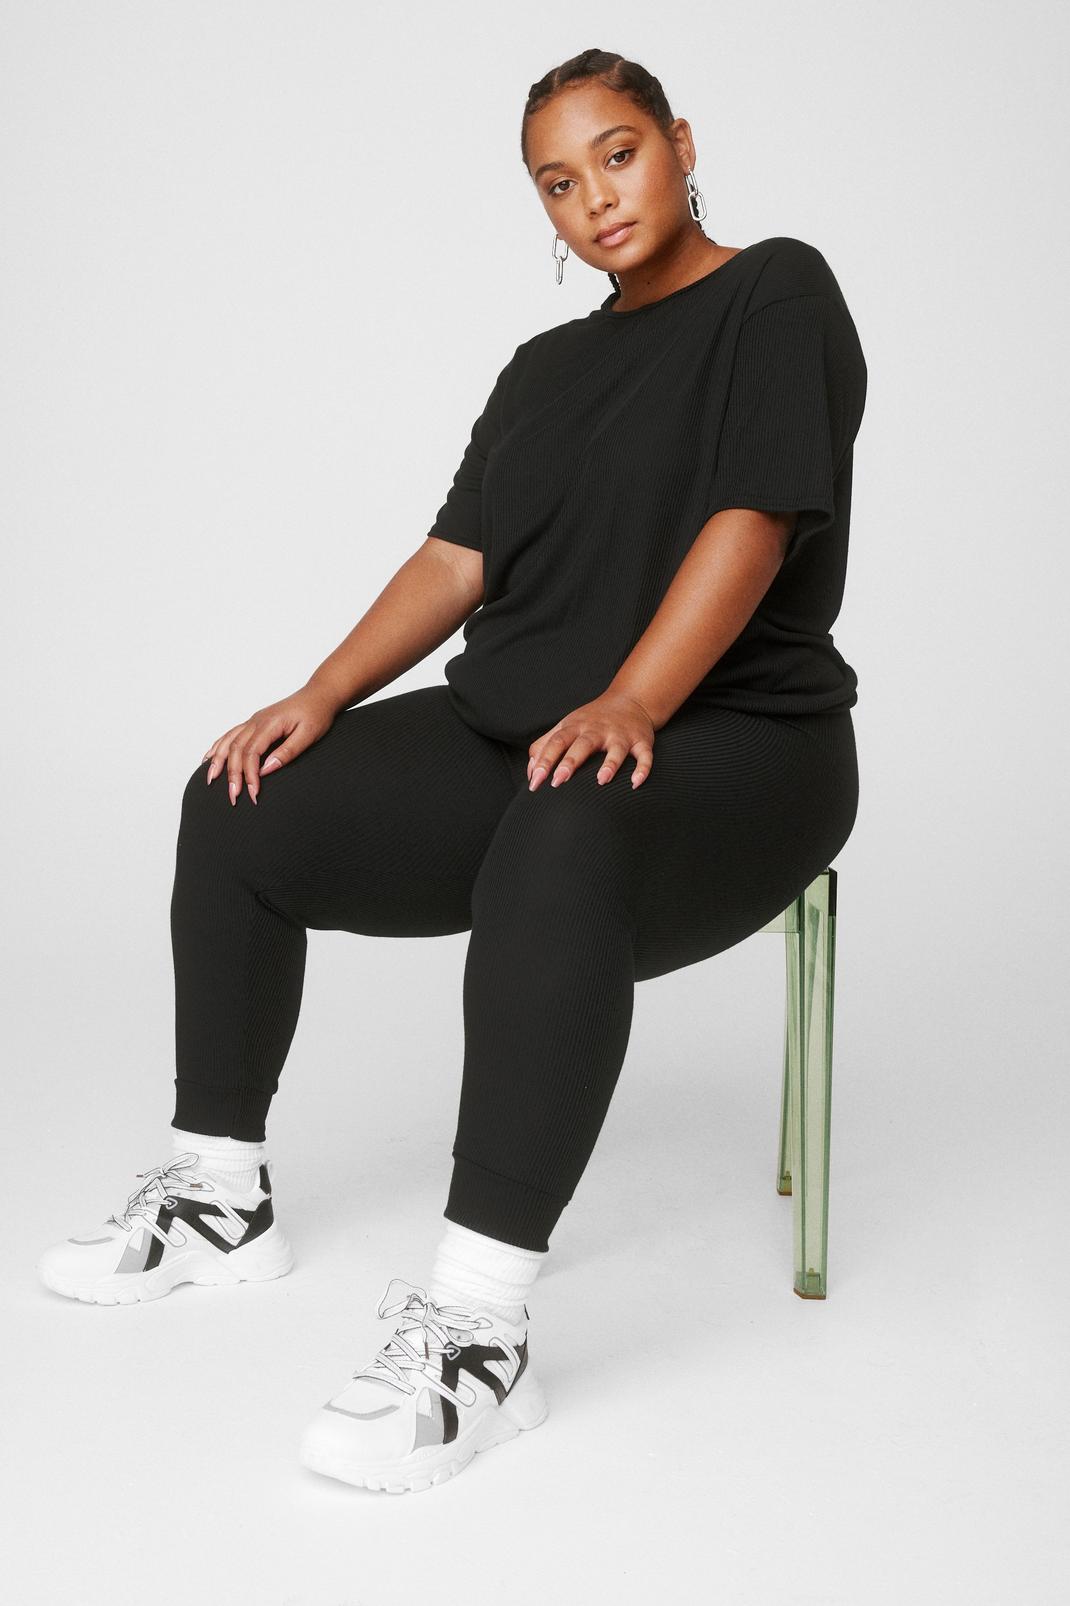 Black Plus Size Fitted Sweatpants Loungewear Set image number 1